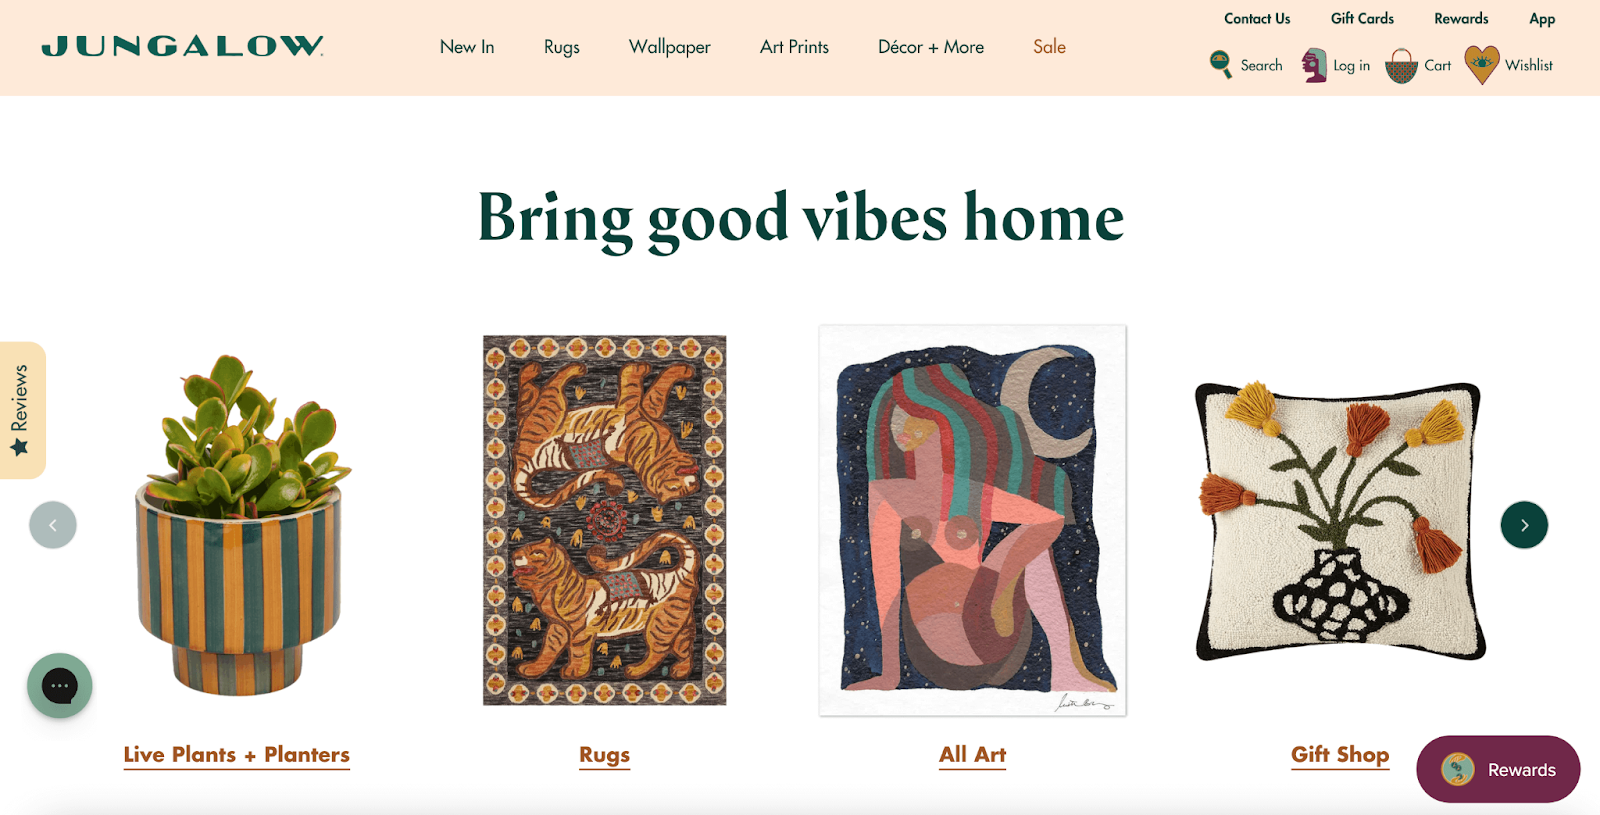 Support Black-owned businesses–A screenshot from Jungalow’s homepage. The section title is ‘Bring good vibes home’. Below are four product images for four of their product categories: a striped blue planter for ‘Live Plants and Planters’, a multicolored rug with two tigers on it for ‘Rugs’, a multicolored print of a women sitting in front of a starry sky for ‘All Art’, and a pillow with a vase and flowers in it for ‘Gift Shop’. 